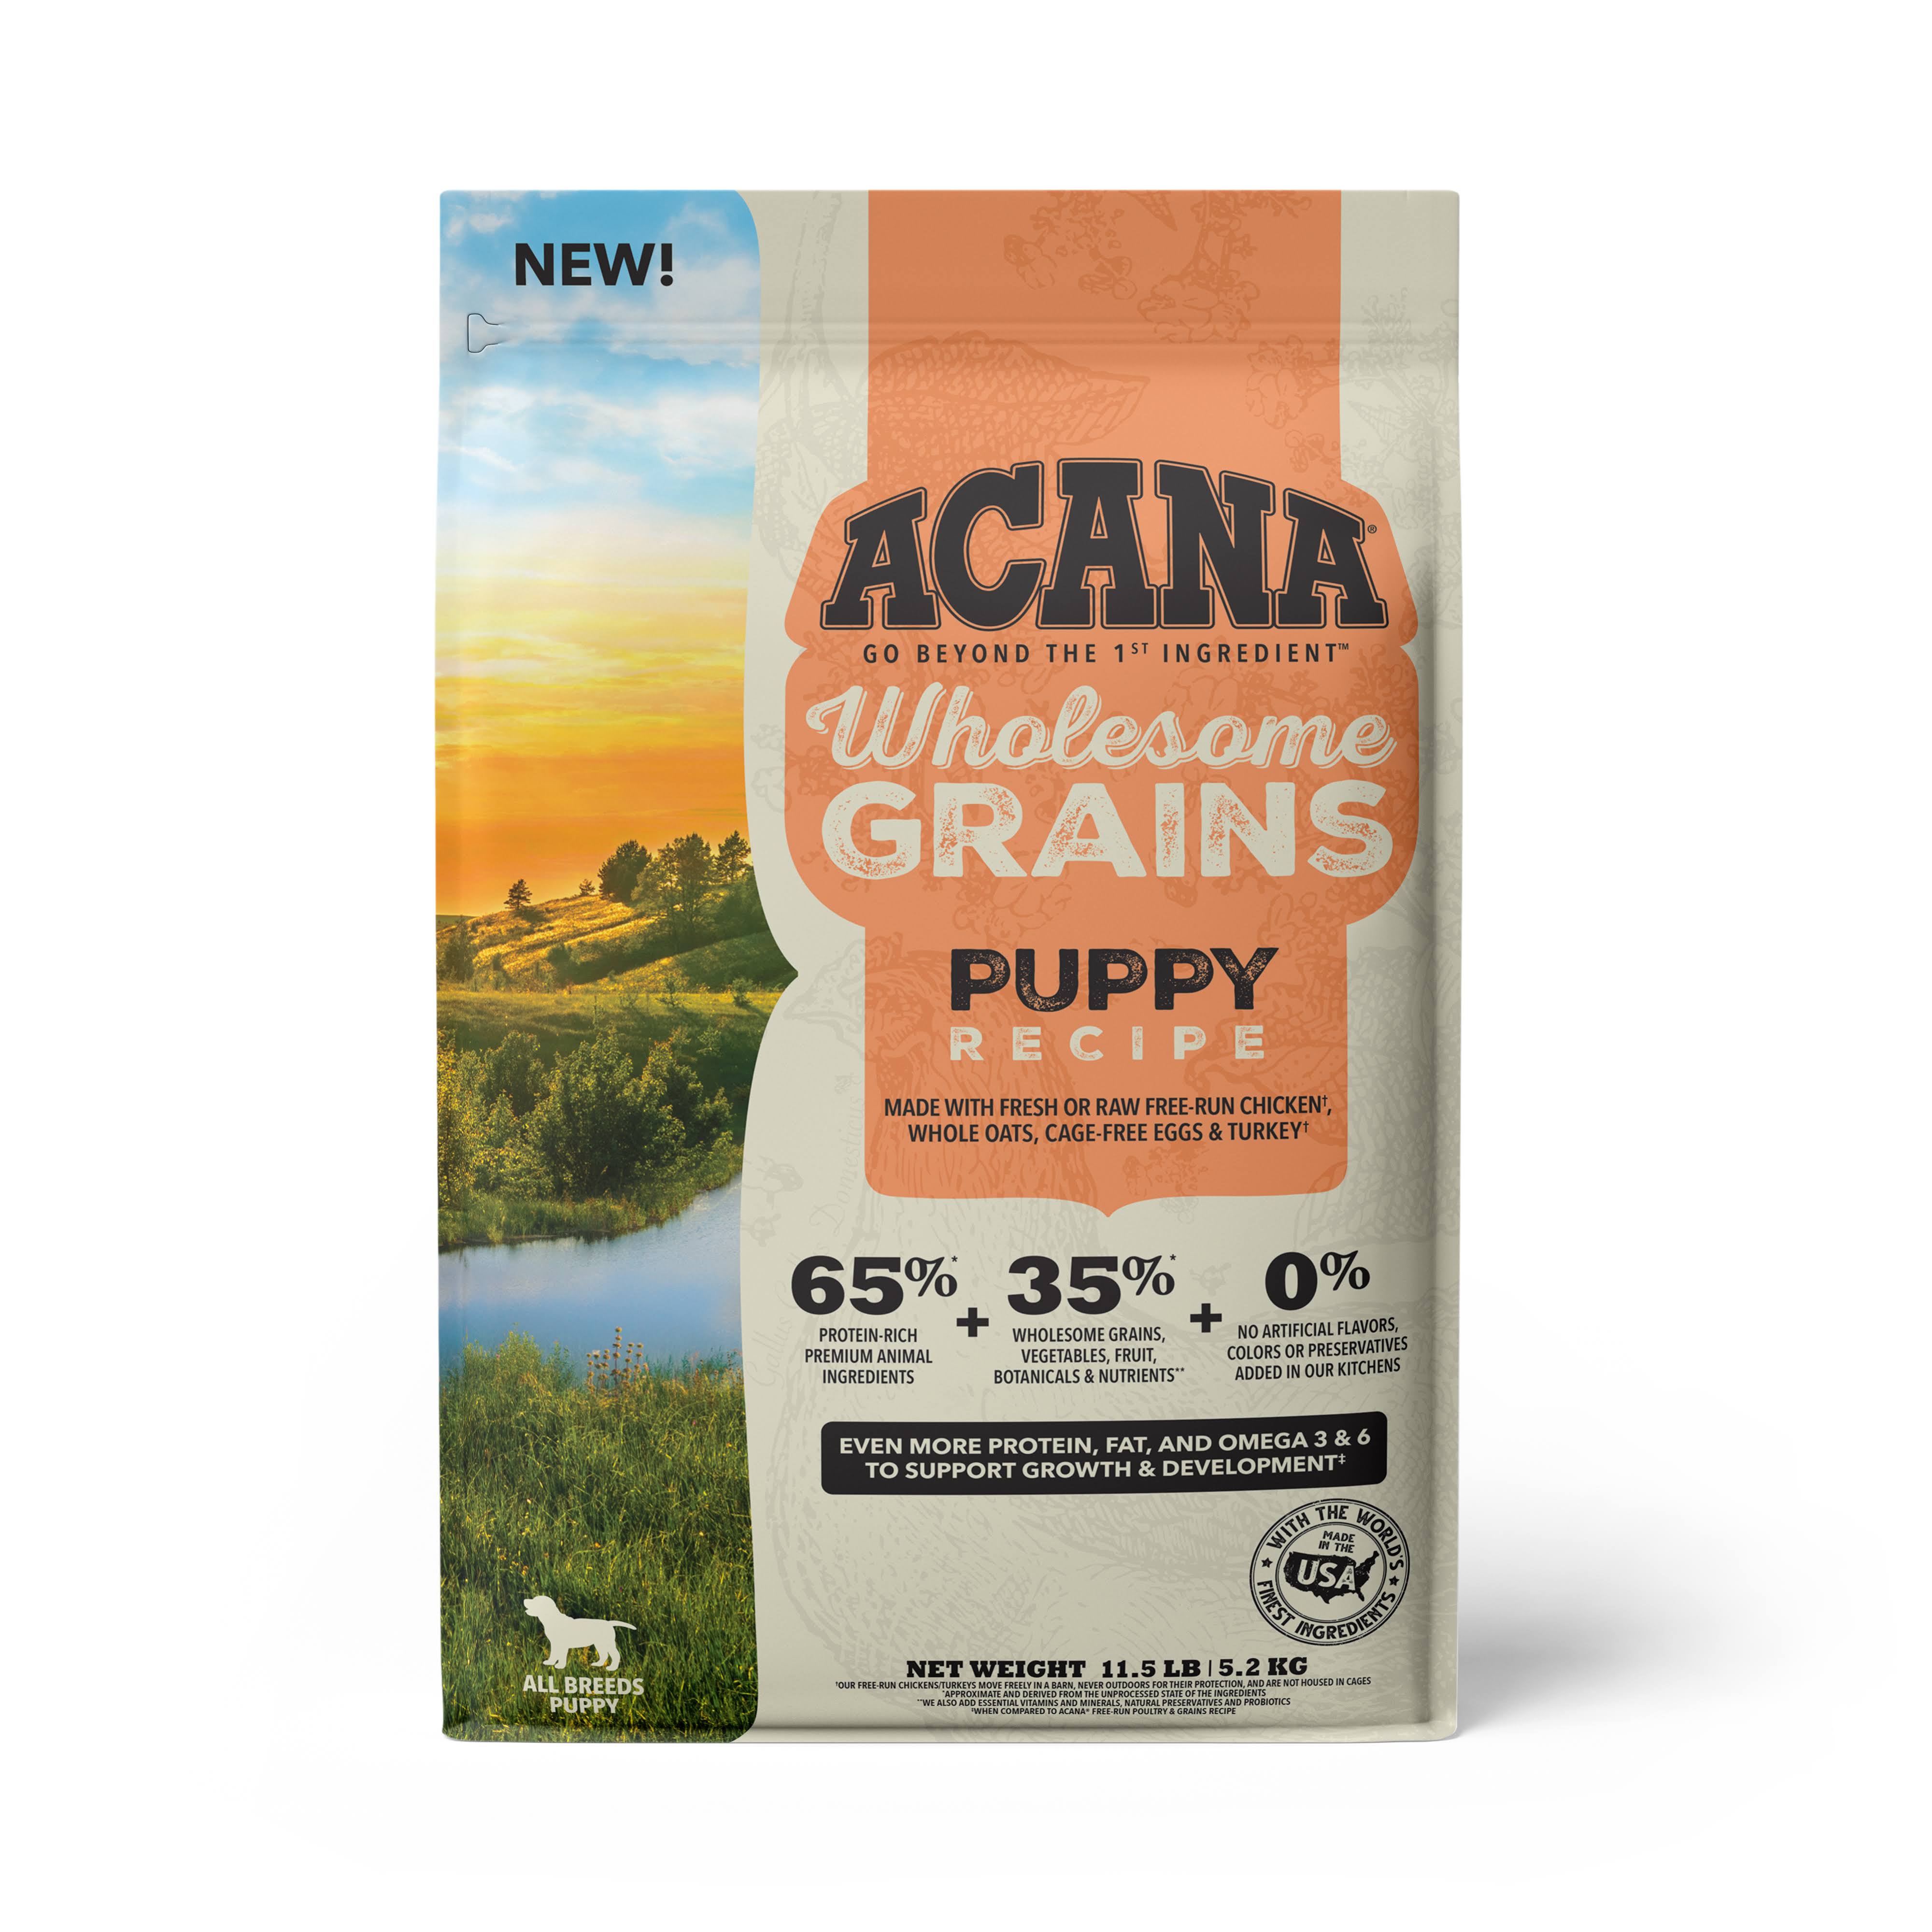 Acana Wholesome Grains, Puppy Recipe Dry Dog Food 11.5lbs